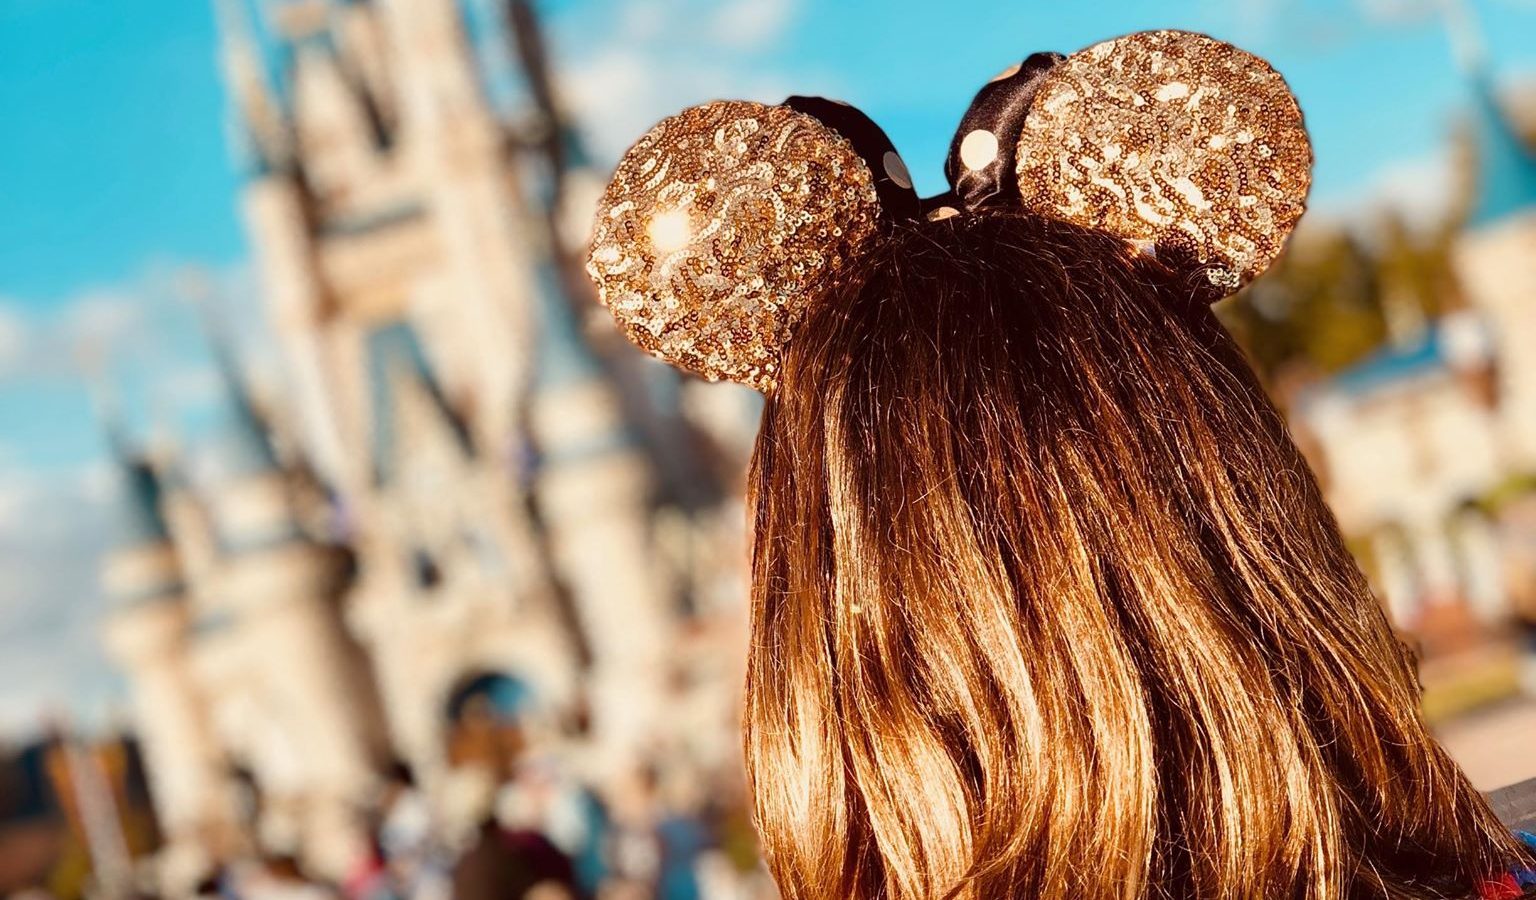 Things To Do In Disney World Tours with Ears